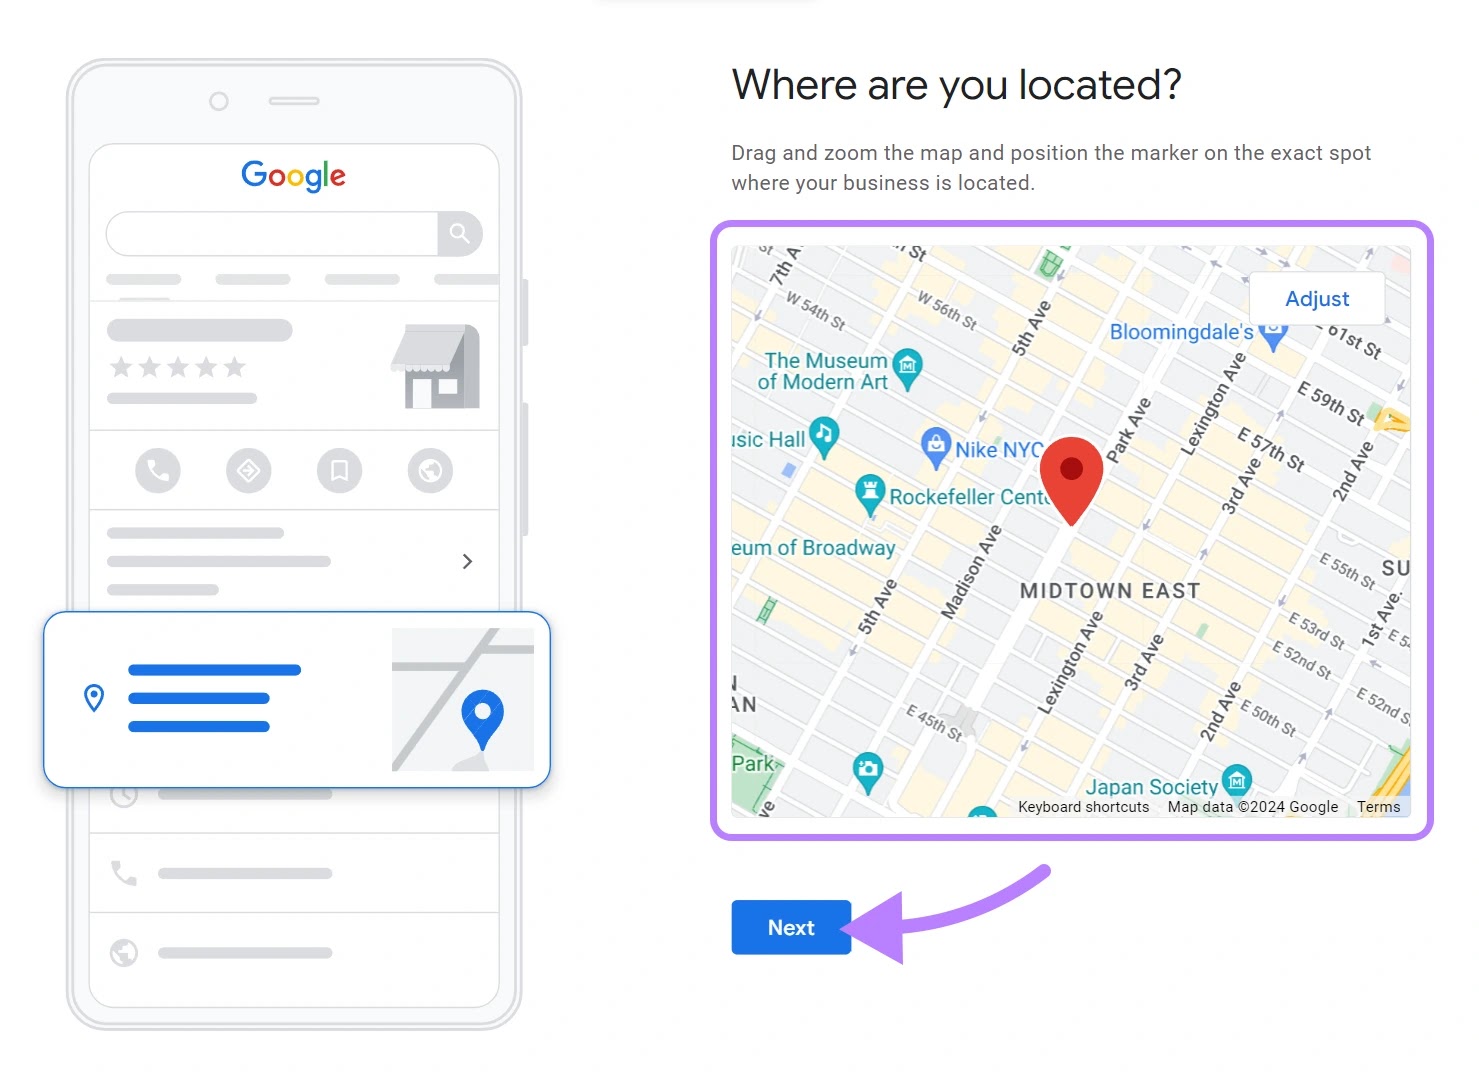 "Where are you located?" window with Google Maps widget